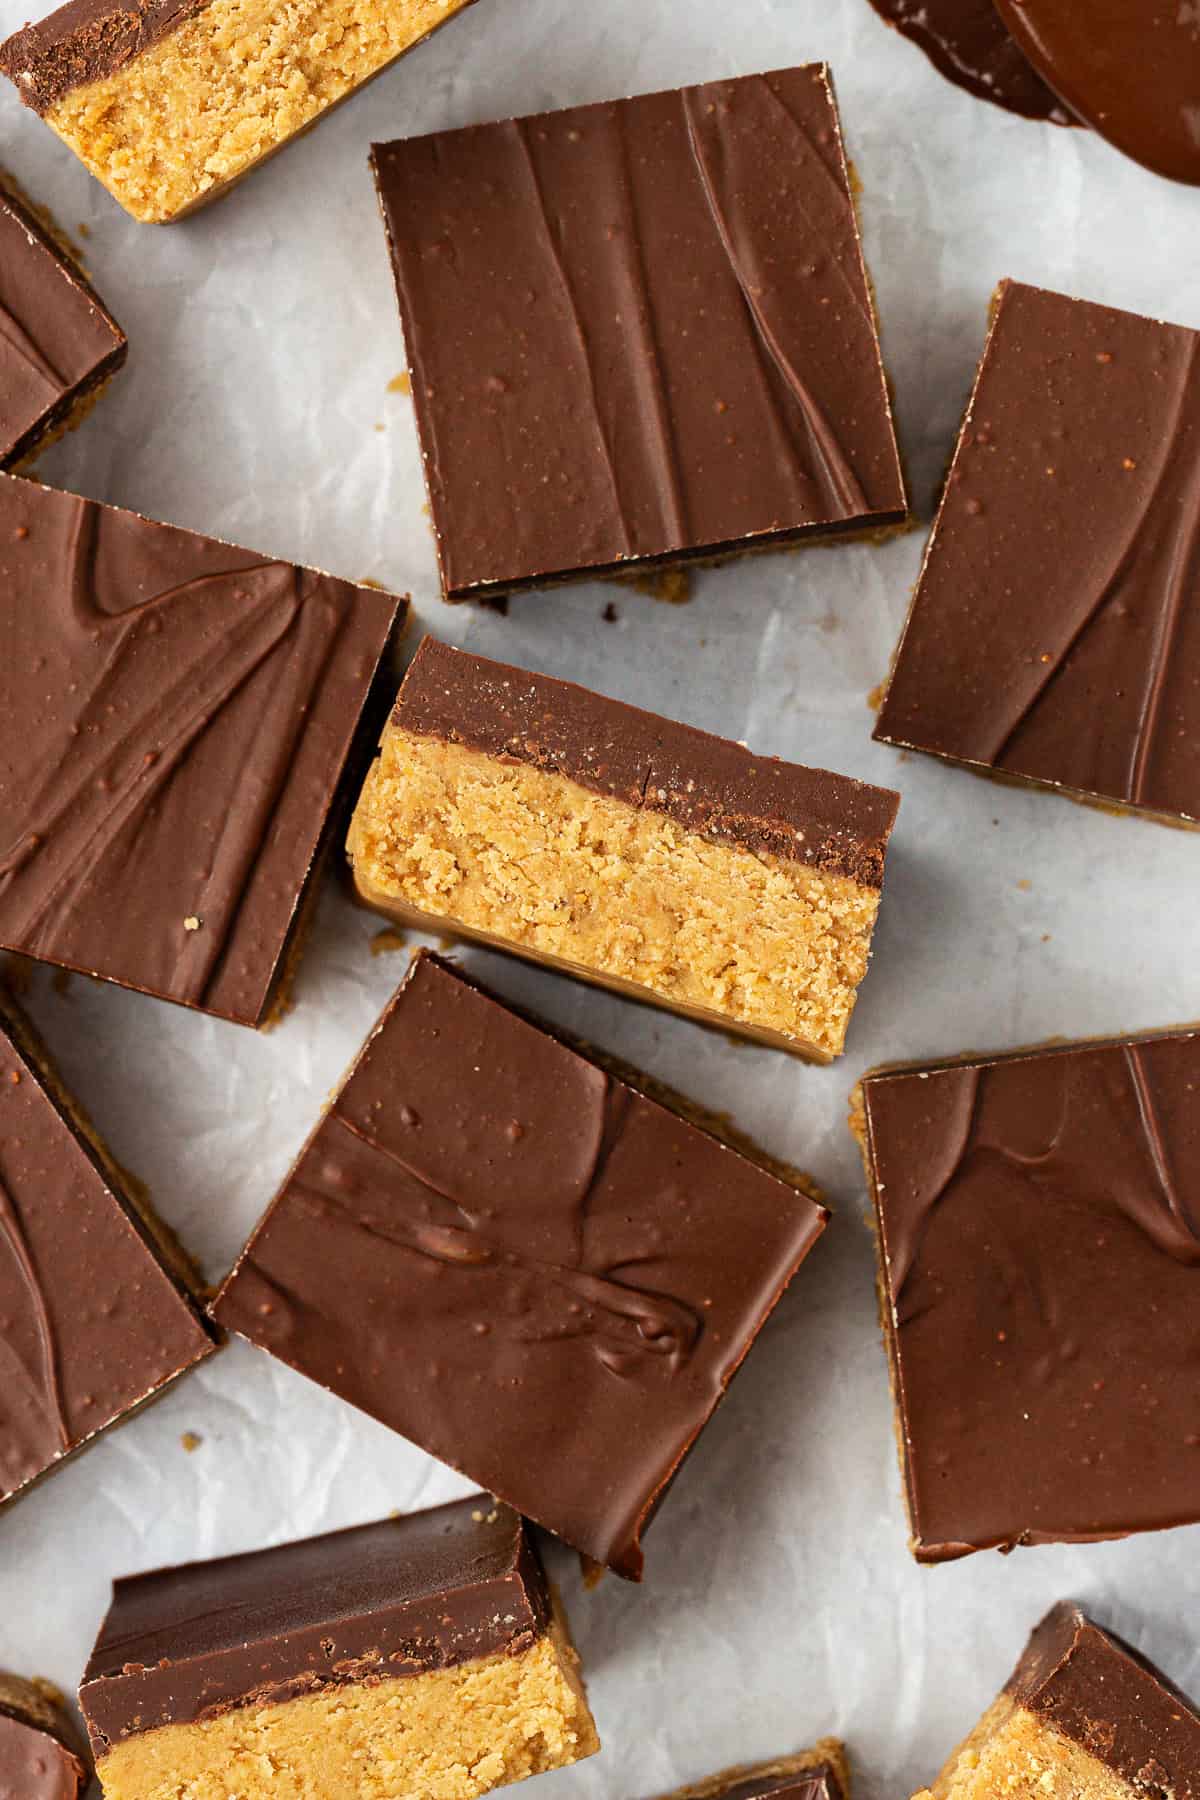 peanut butter bars scattered all around on white parchment paper, some laying flat and some on their sides showing the layers of peanut butter and chocolate